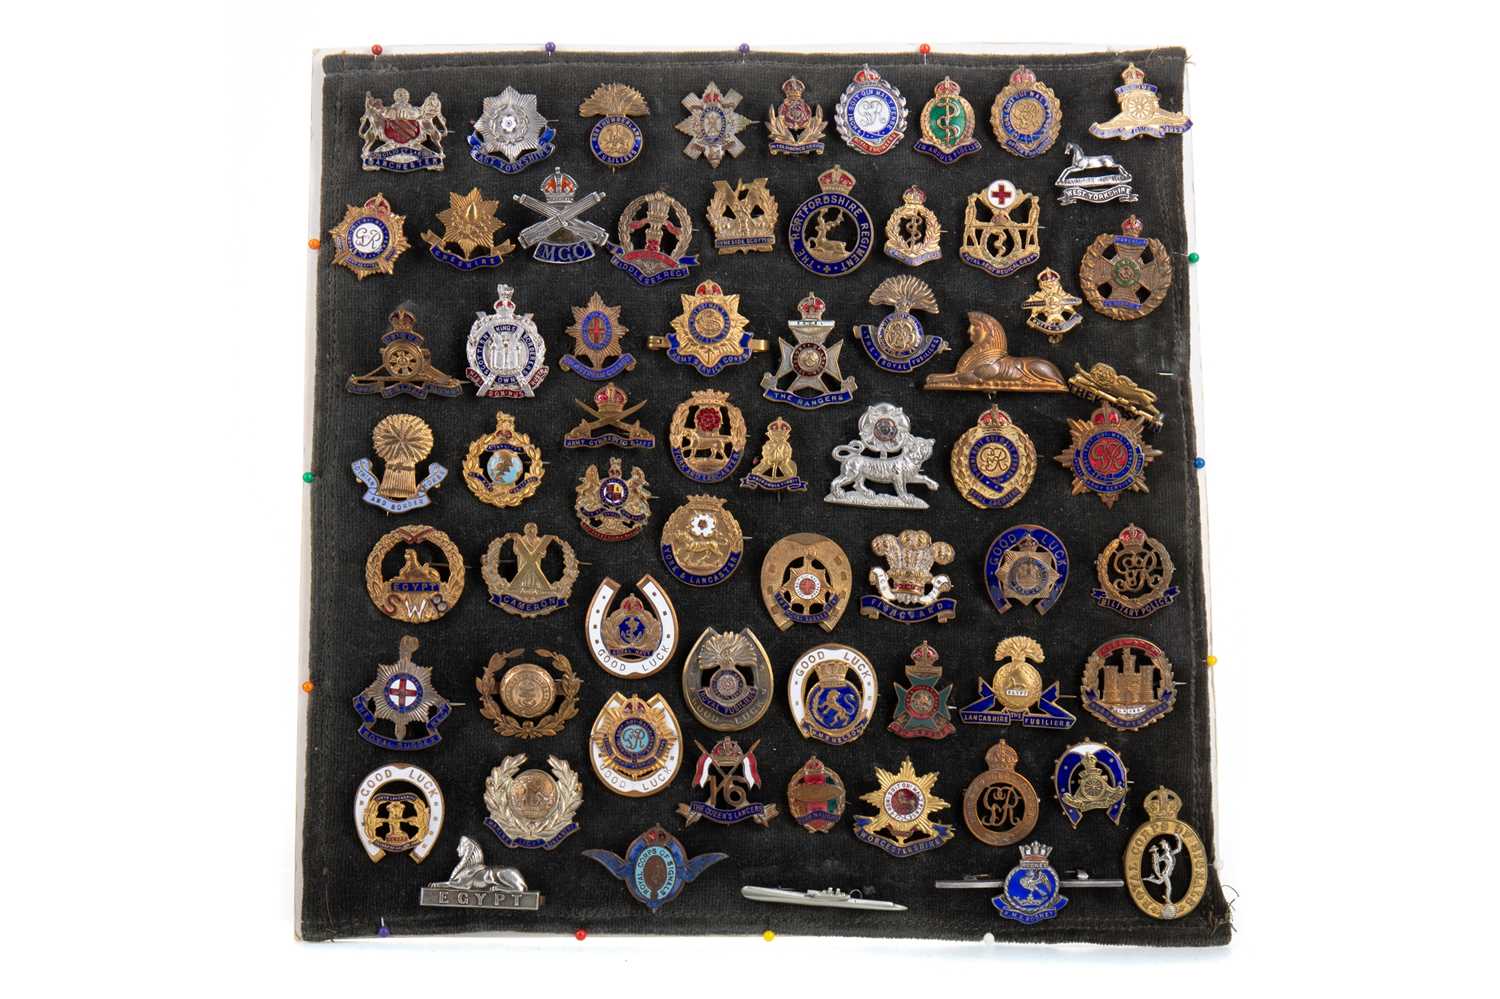 Lot 428 - A BOARD OF CHIEFLY BRITISH REGIMENT BROOCHES